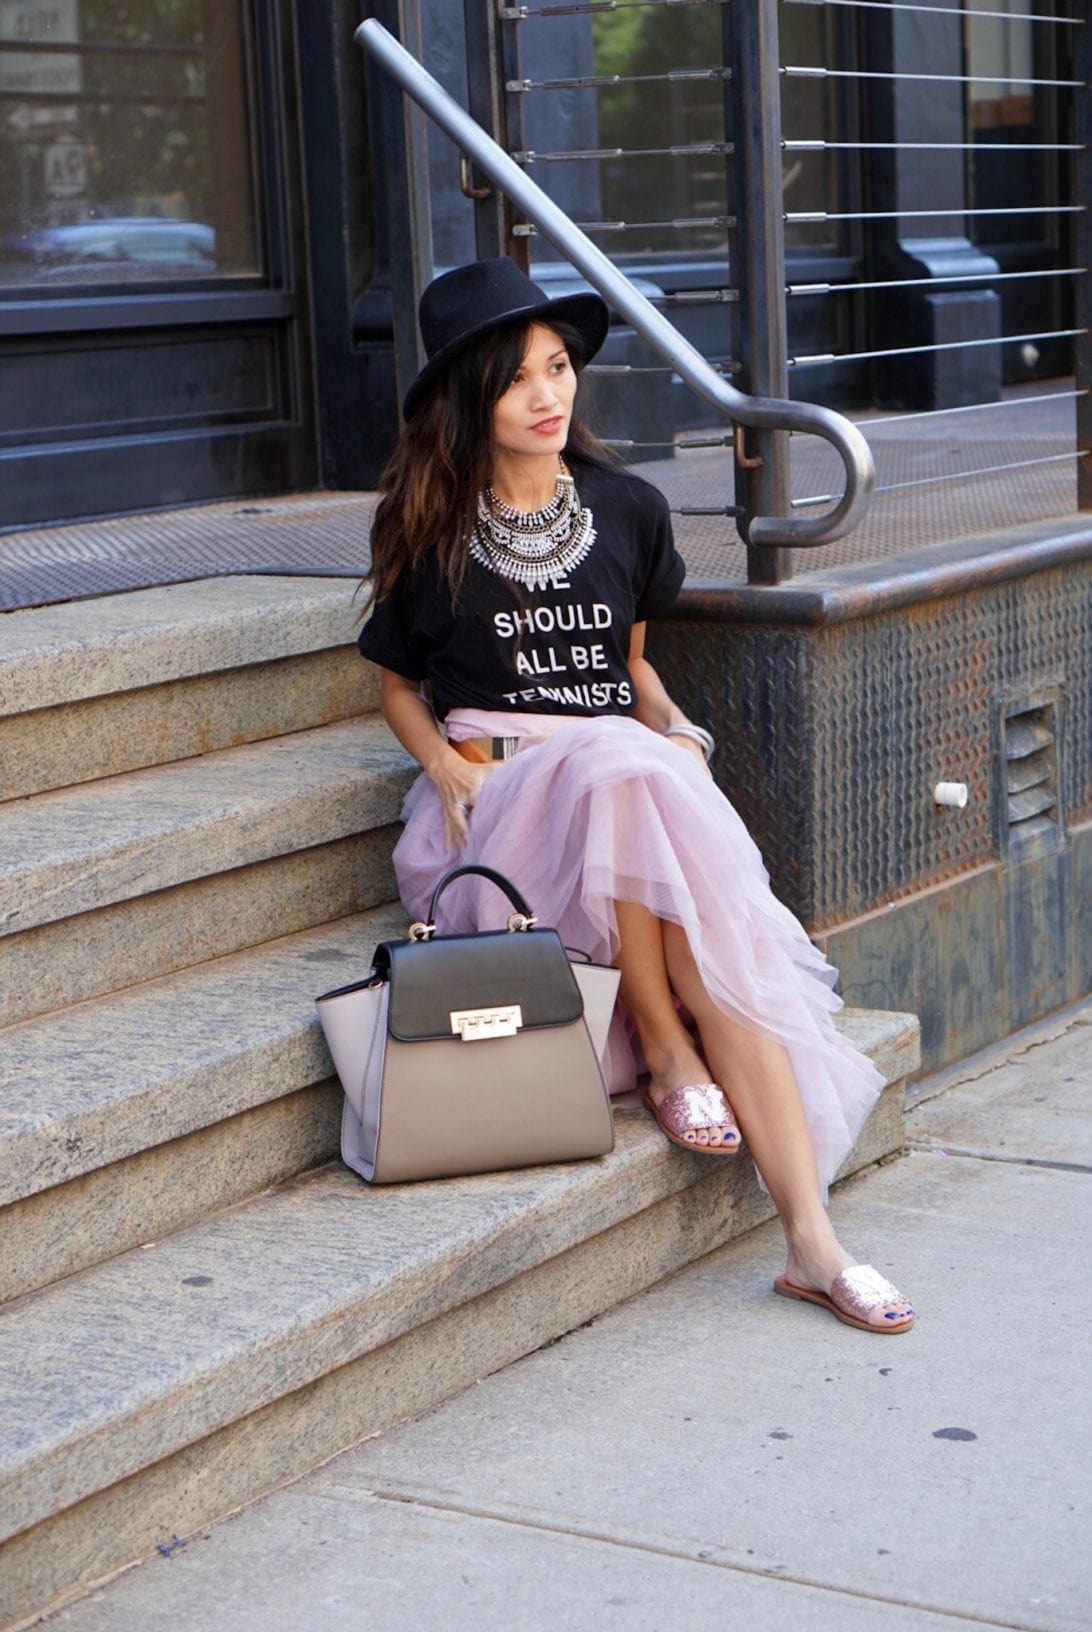 NYC STREET STYLE, New York FASHION WEEK, New York CITY, NYFW 2017, NYFW STREET STYLE, STREET STYLE, FEMINIST, TULLE SKIRT, SEX AND THE CITY OUTFIT, NY GLITTER FLATS, ZAC ZAC POSEN BAG, FEDORA